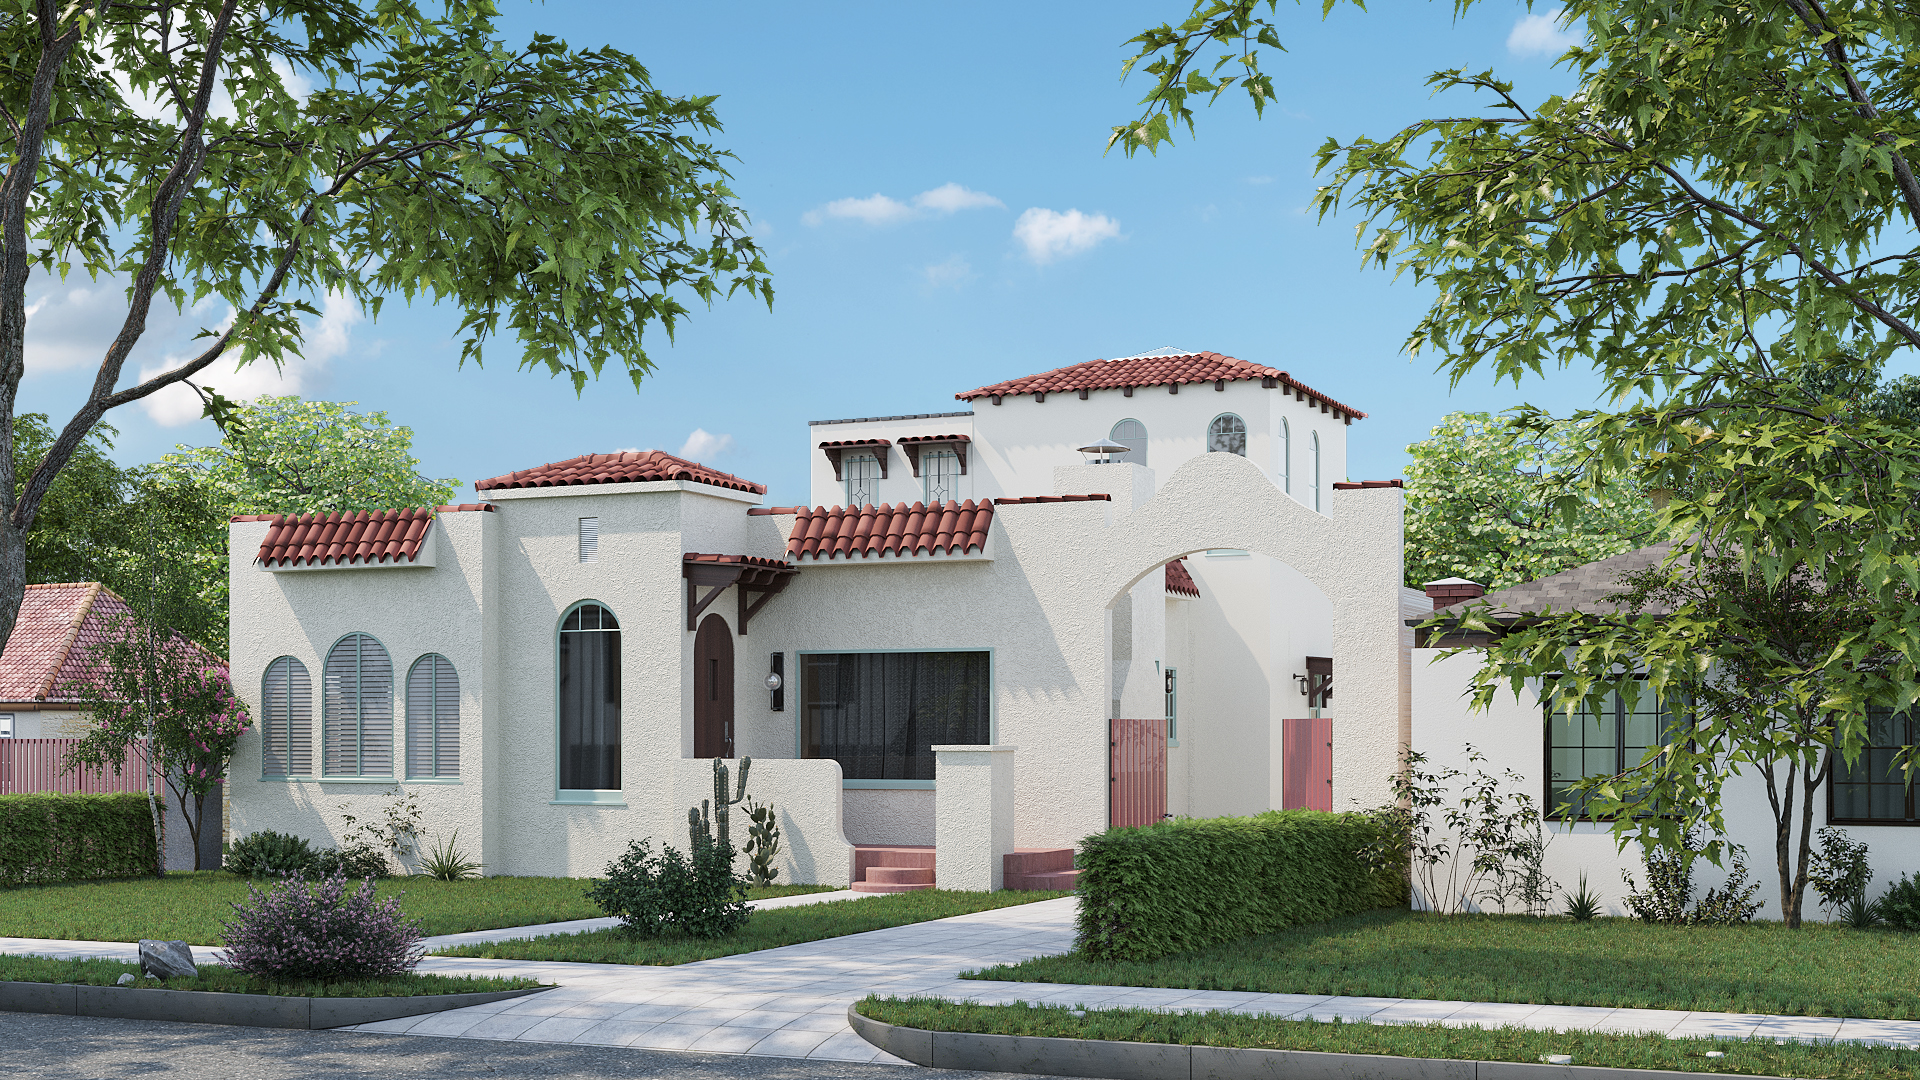 Photorealistic Architectural Rendering of a Custom, Spanish Style Home in South Pasadena